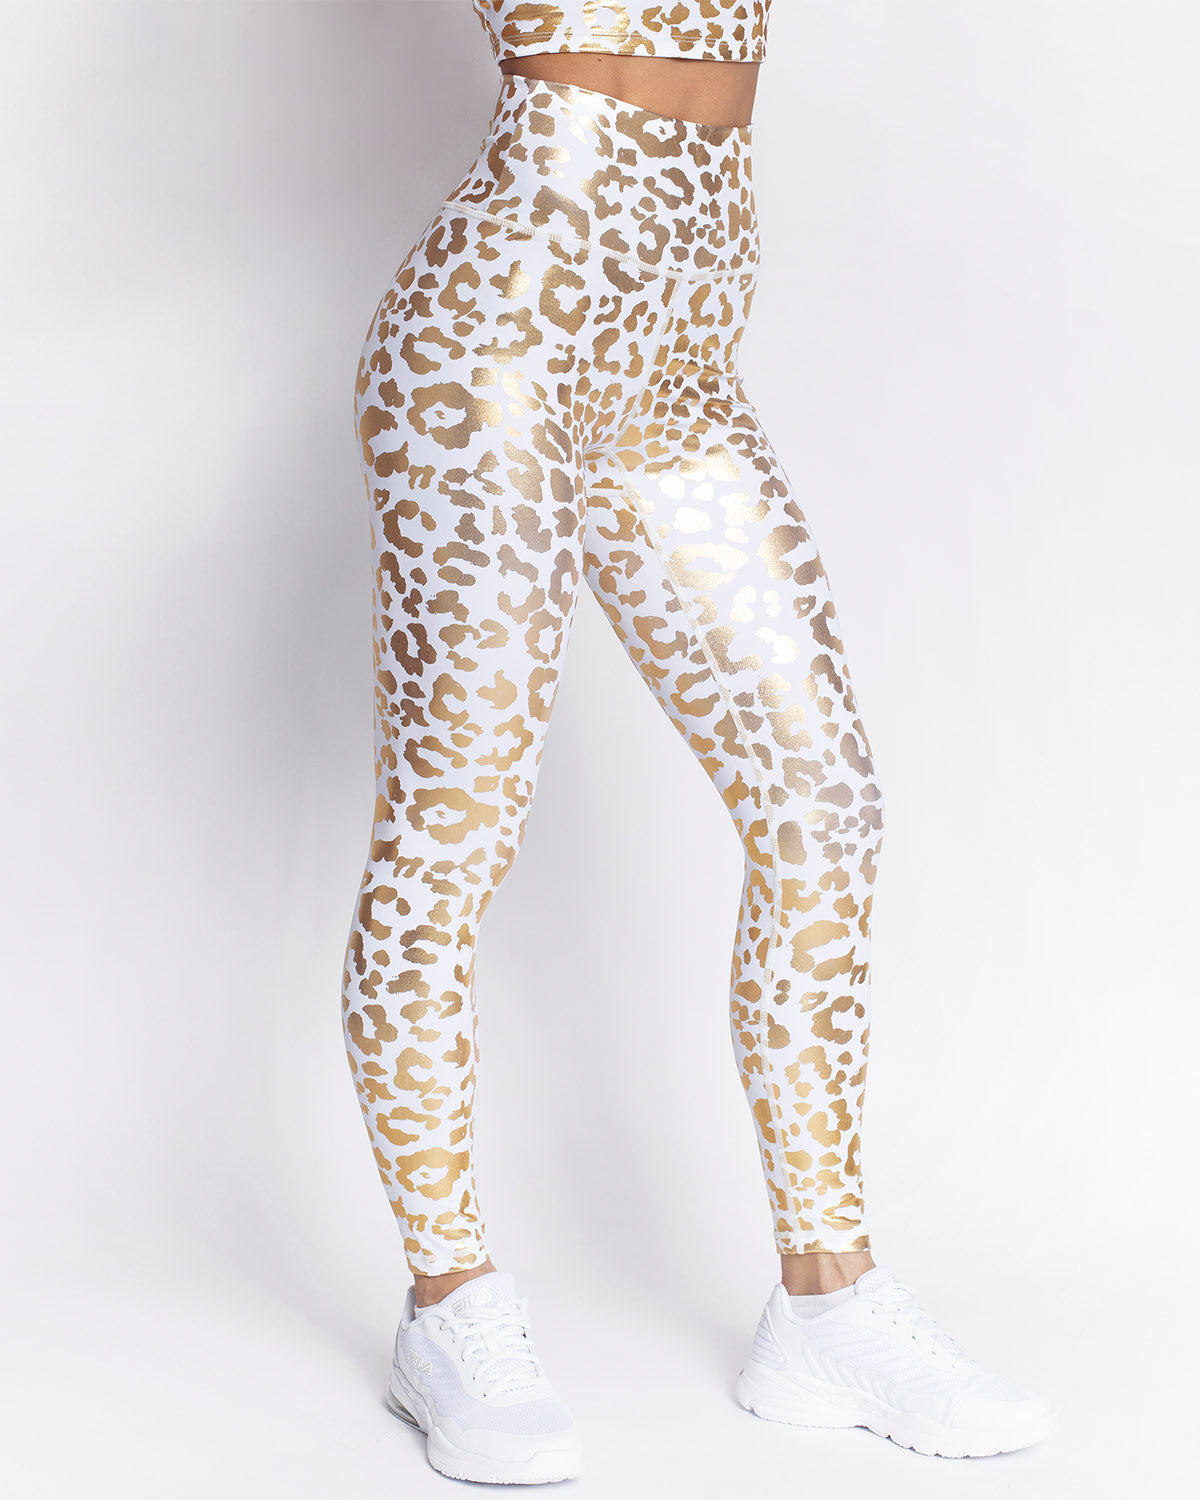 NKD Smooth Tech White Leopard Leggings Size 24 - $42 - From Amy